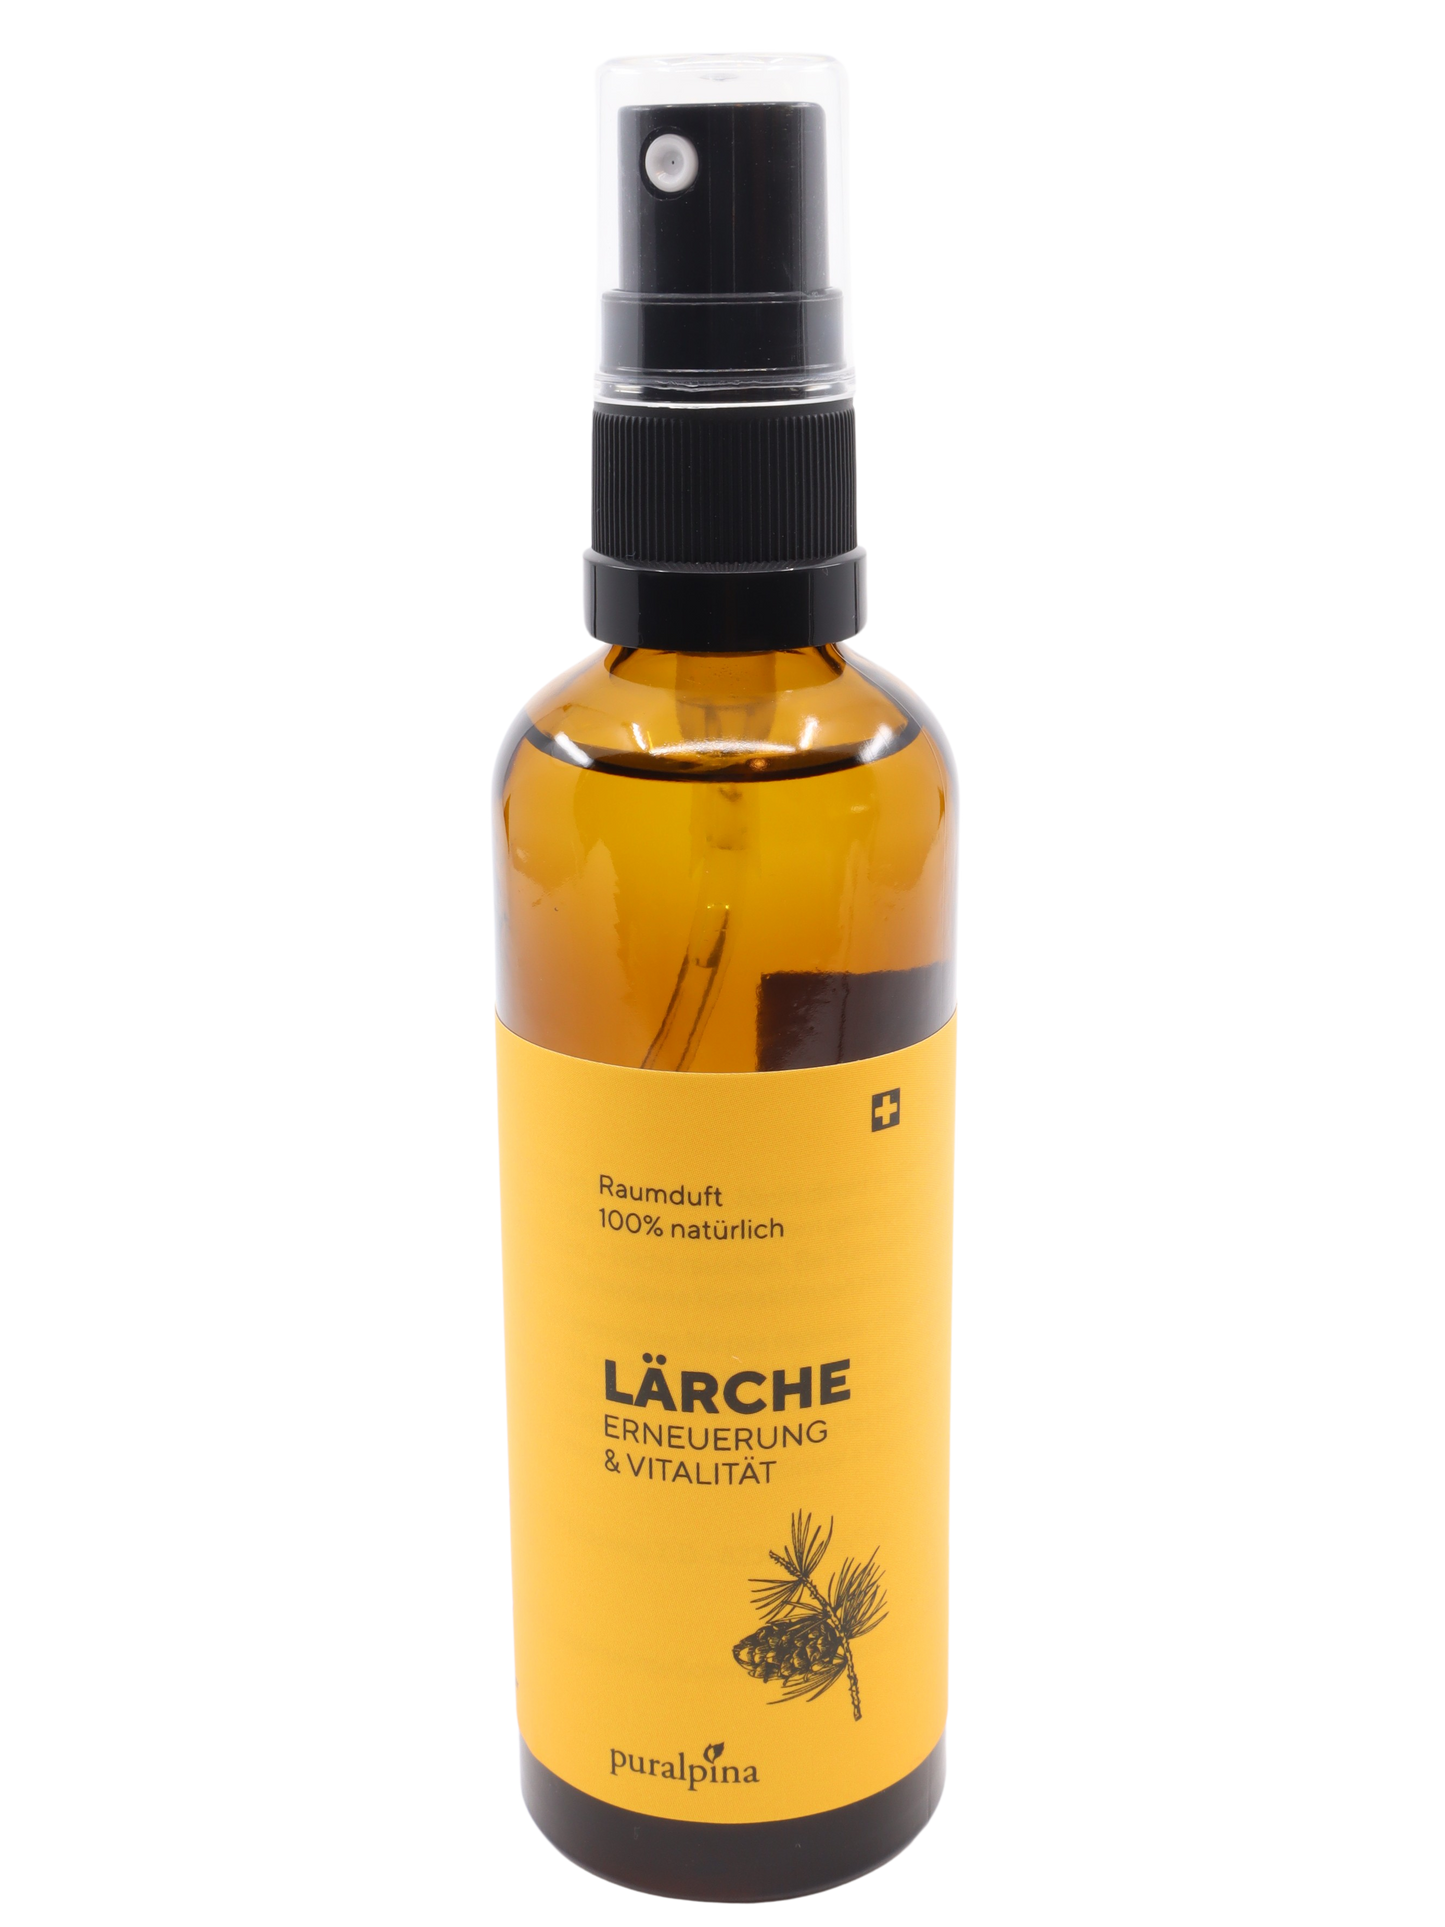 Larch room fragrance and pillow spray